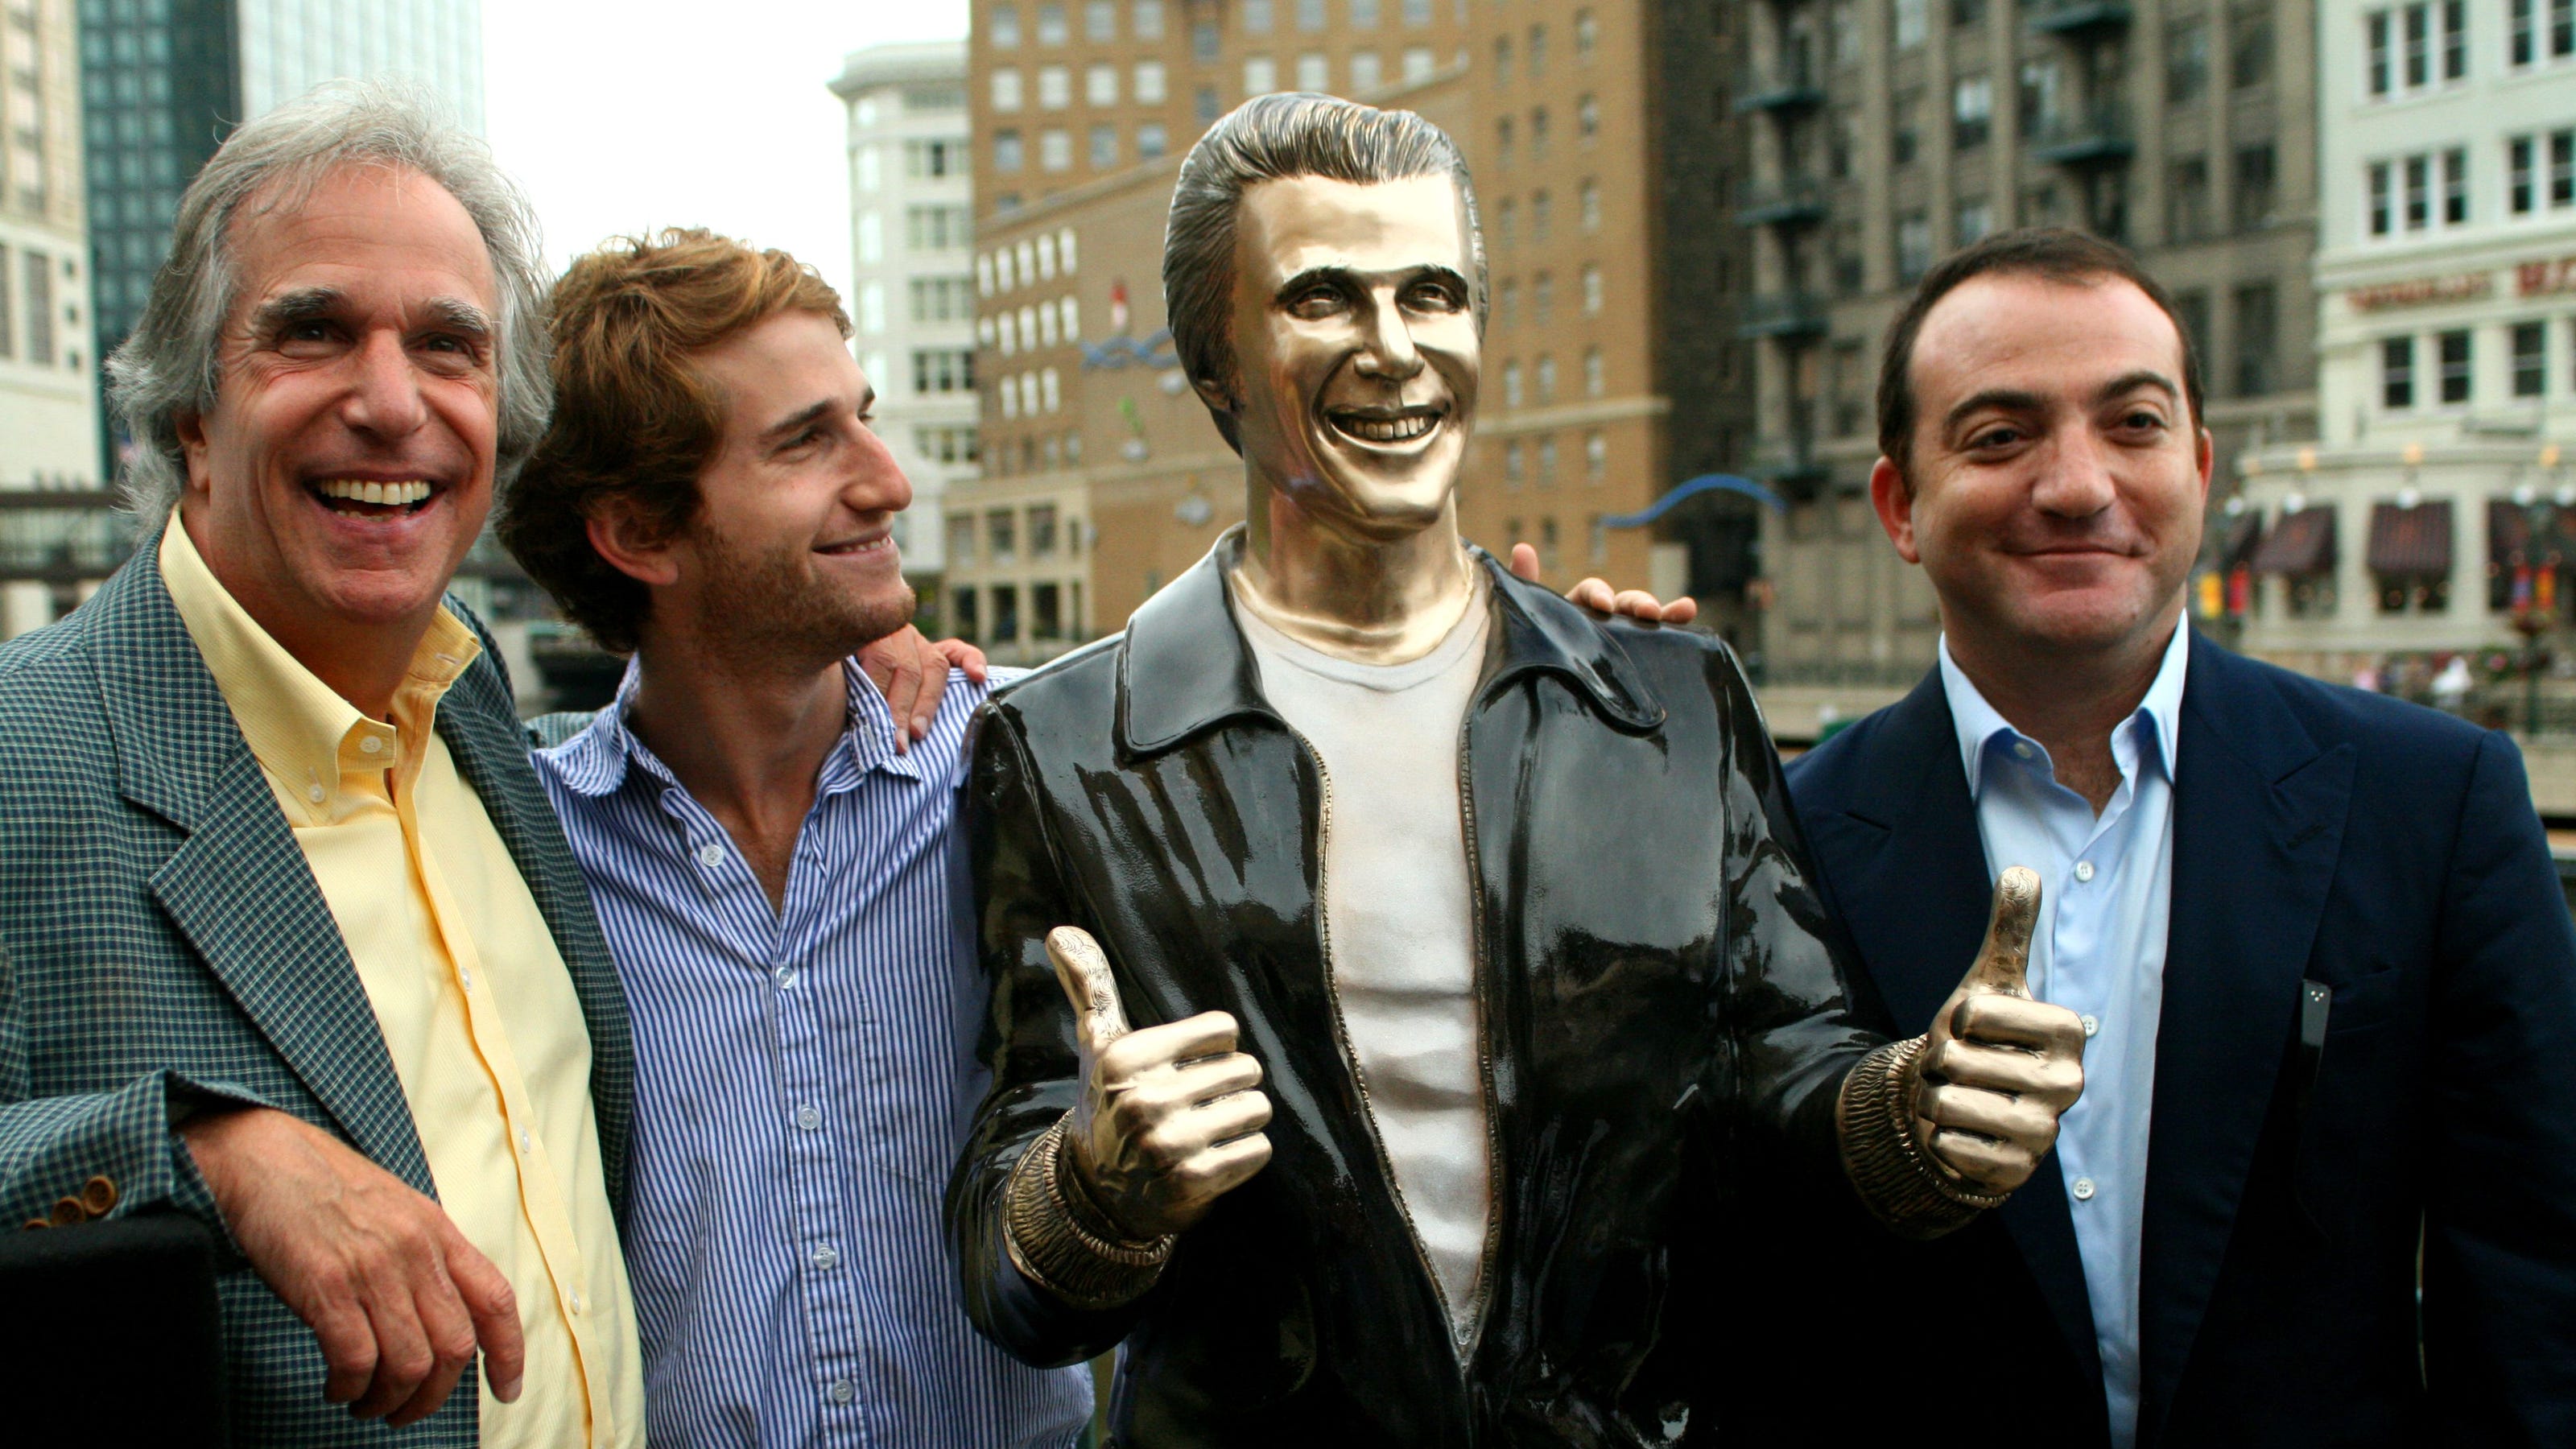 For 10 years, Fonz has been a favorite for Milwaukee visitors